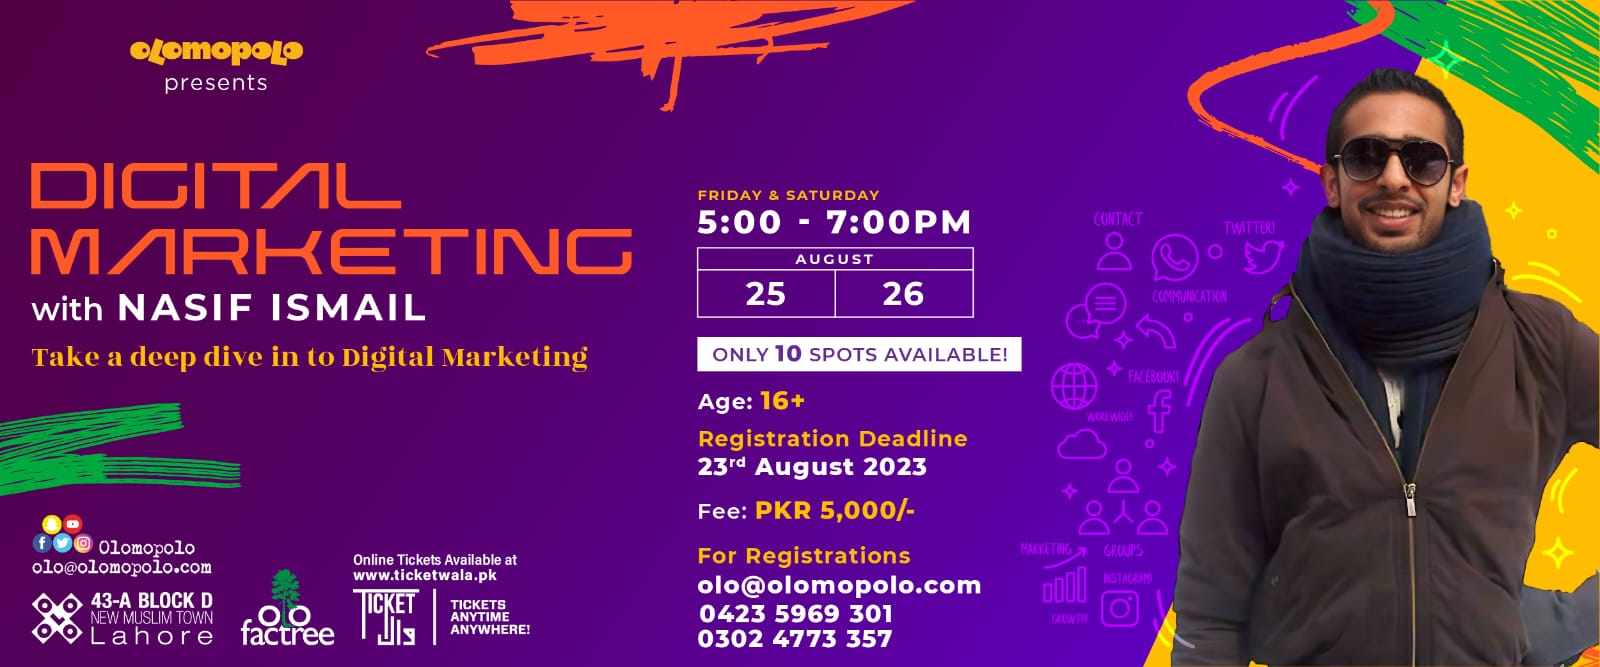 Digital Marketing with Nasif Ismail